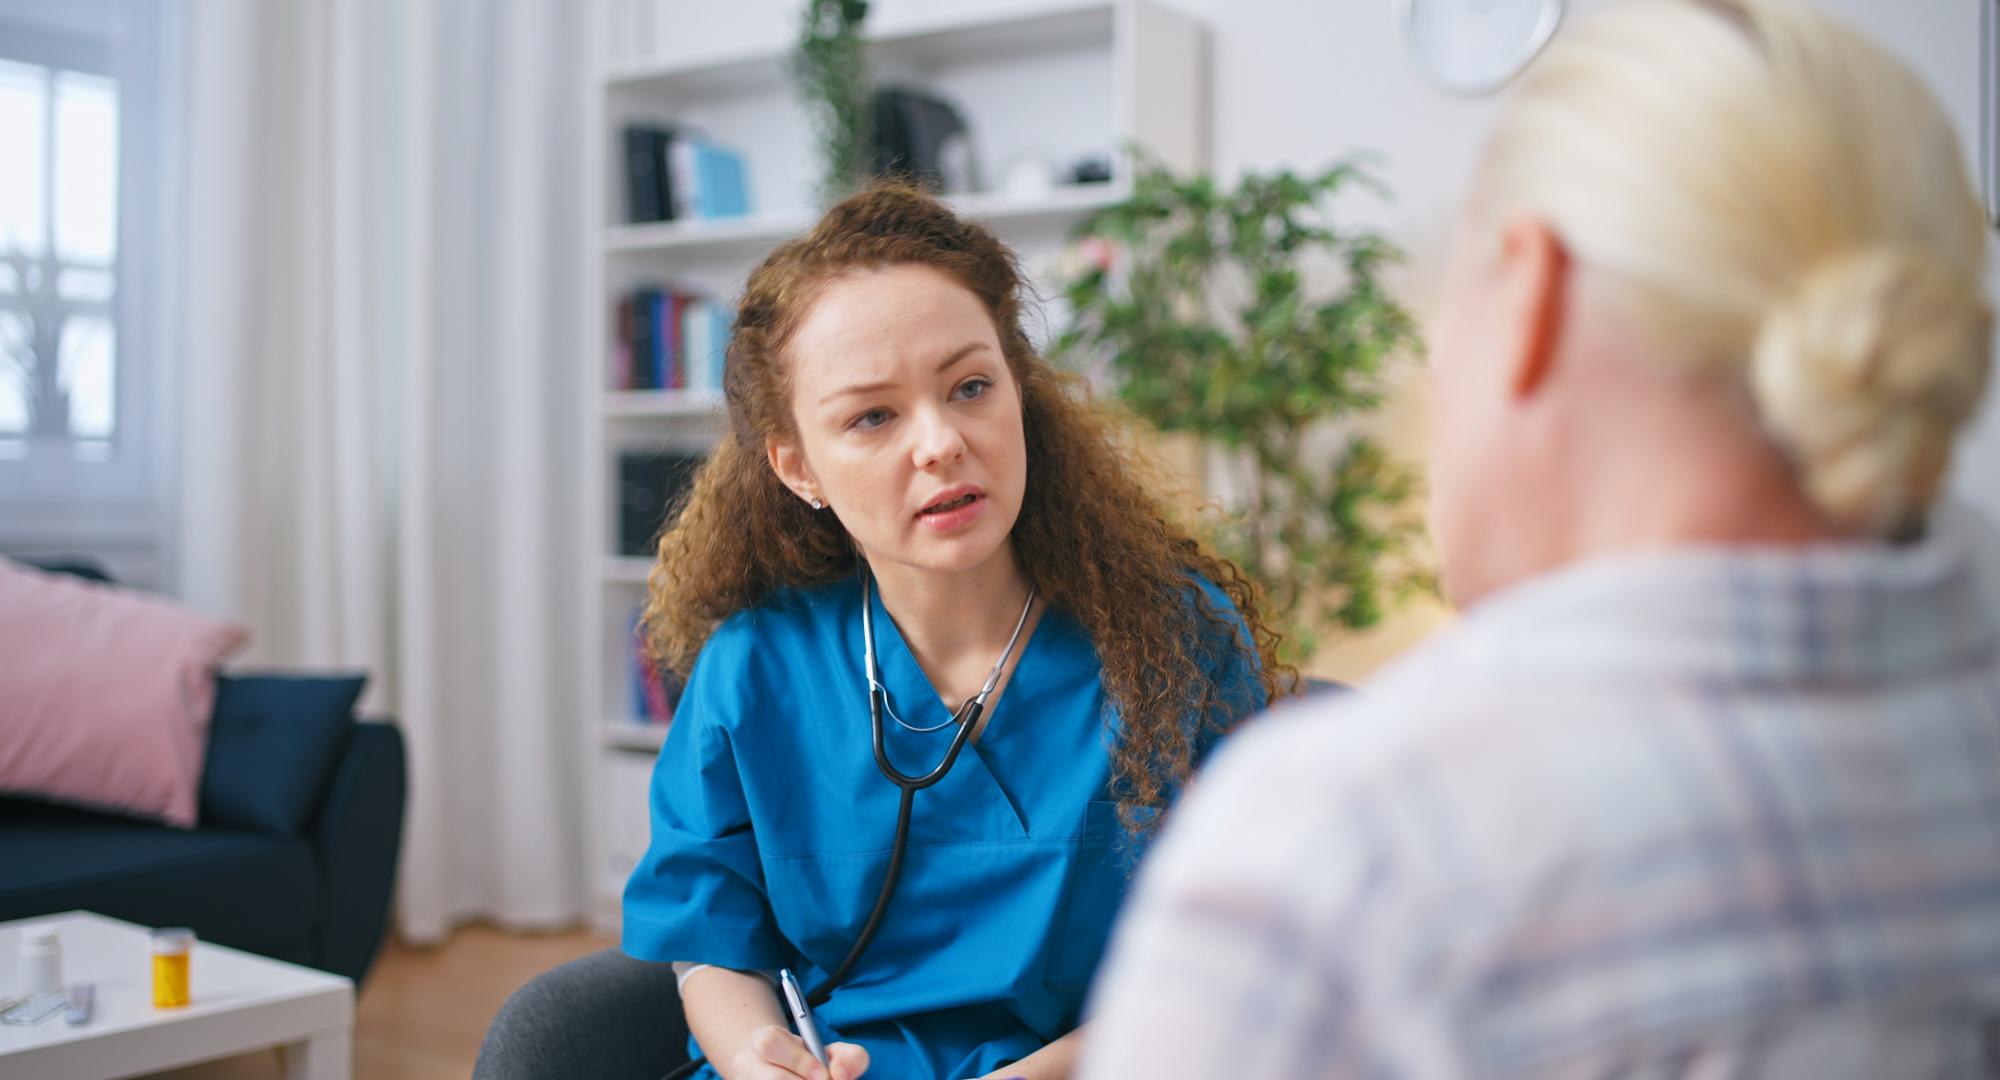 A therapist listens to the patient's complaints, fills out a medical form, and provides home care